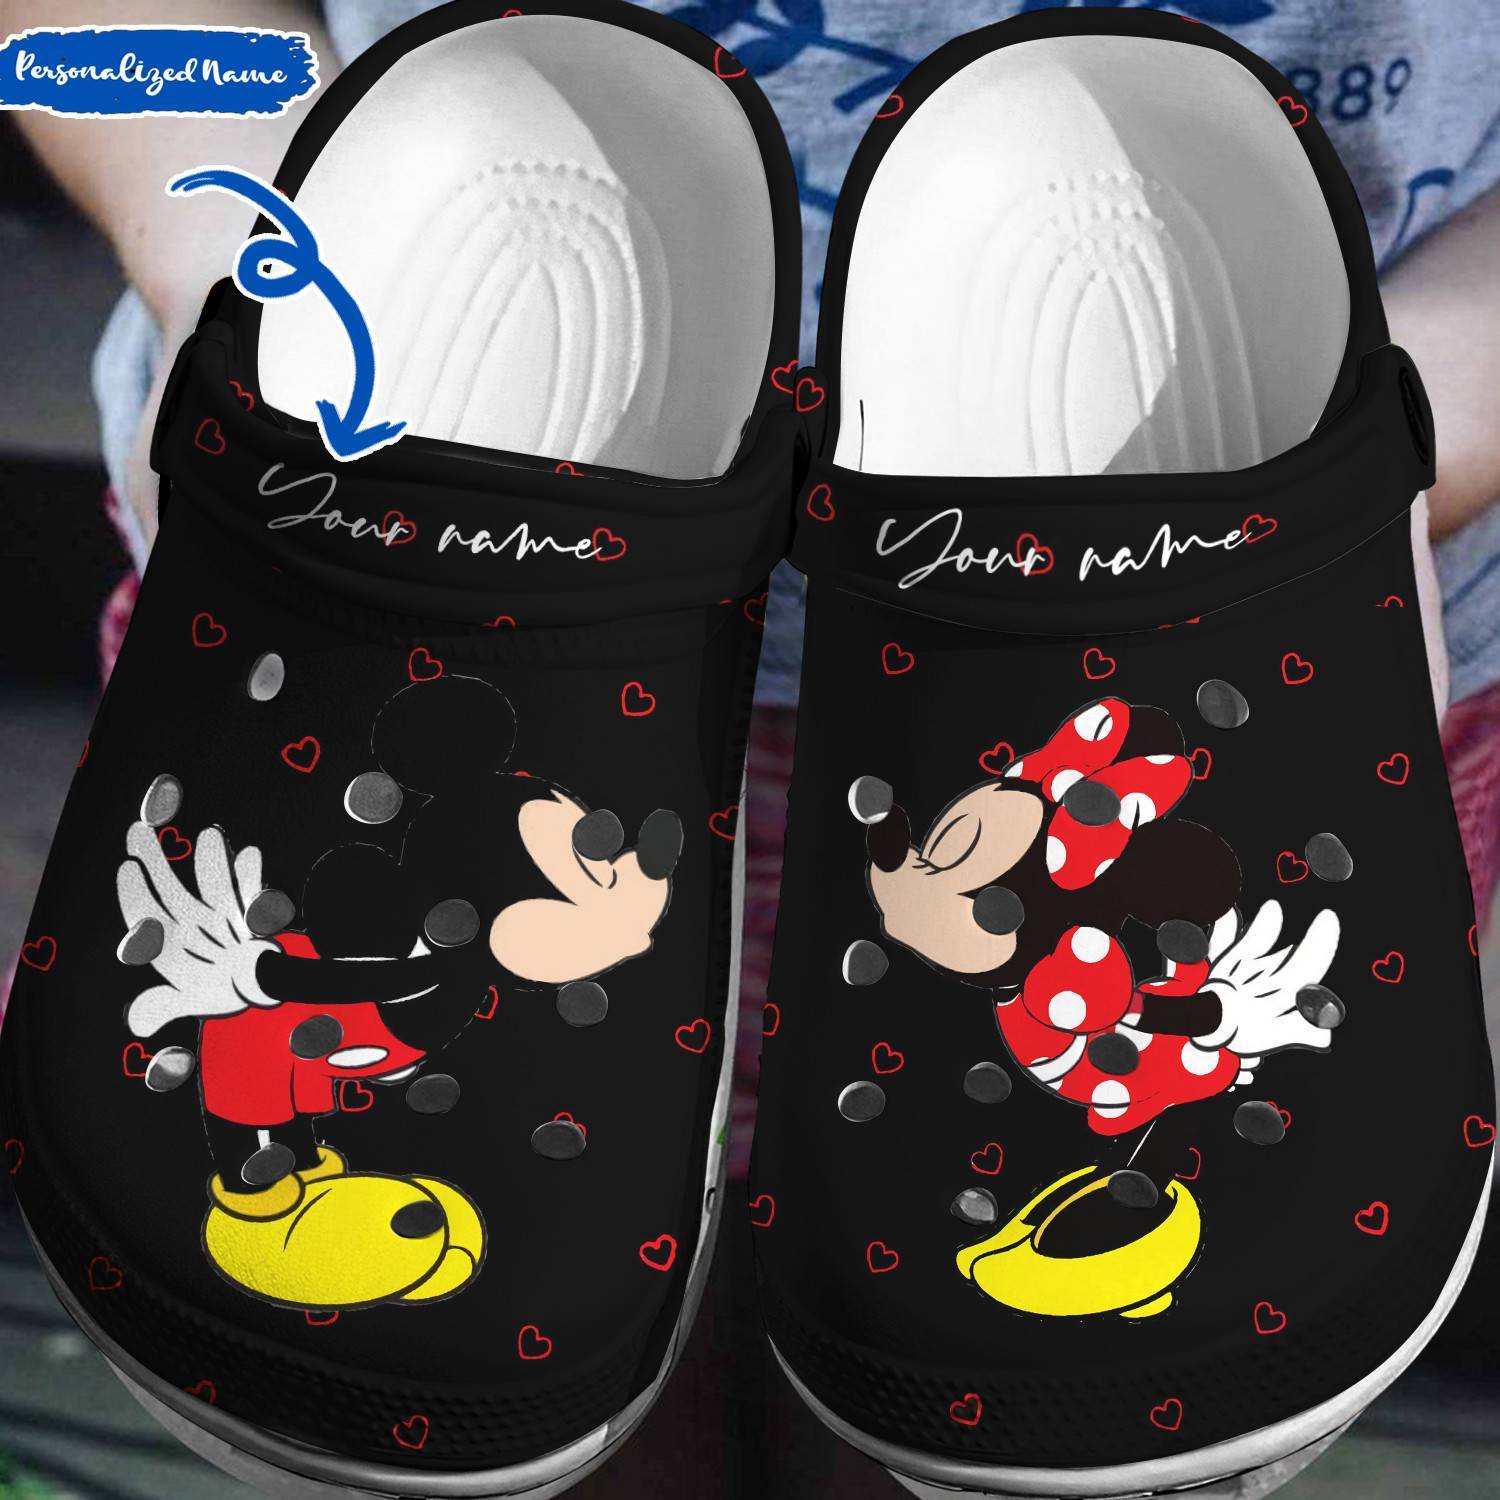 Customized Disney Style: Personalized Mickey Minnie Crocs 3D Clog Shoes